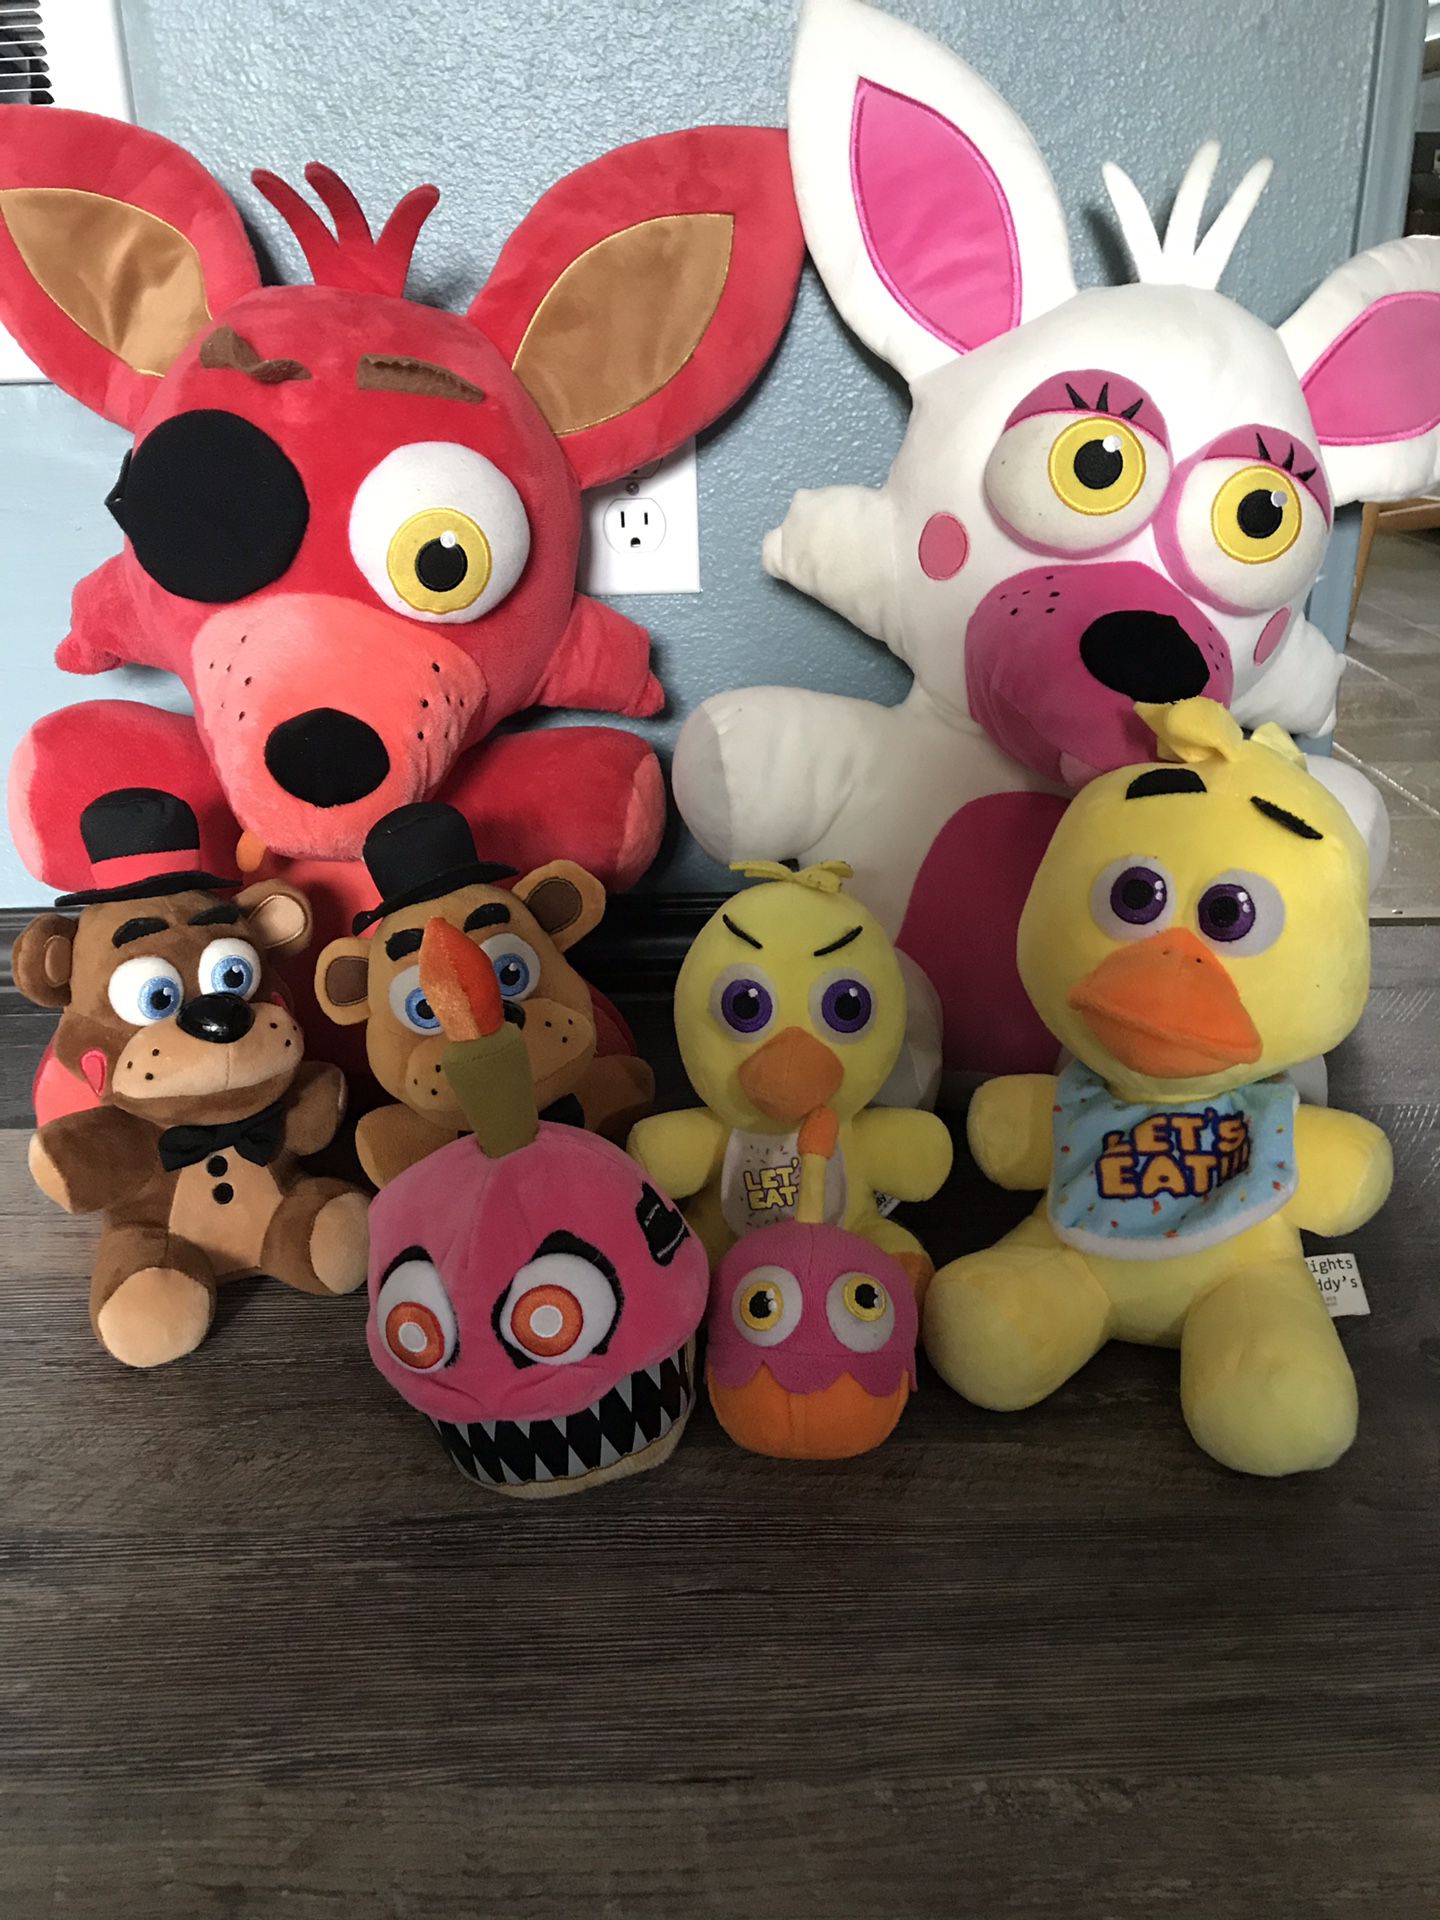 Five Nights at Freddy’s plushies